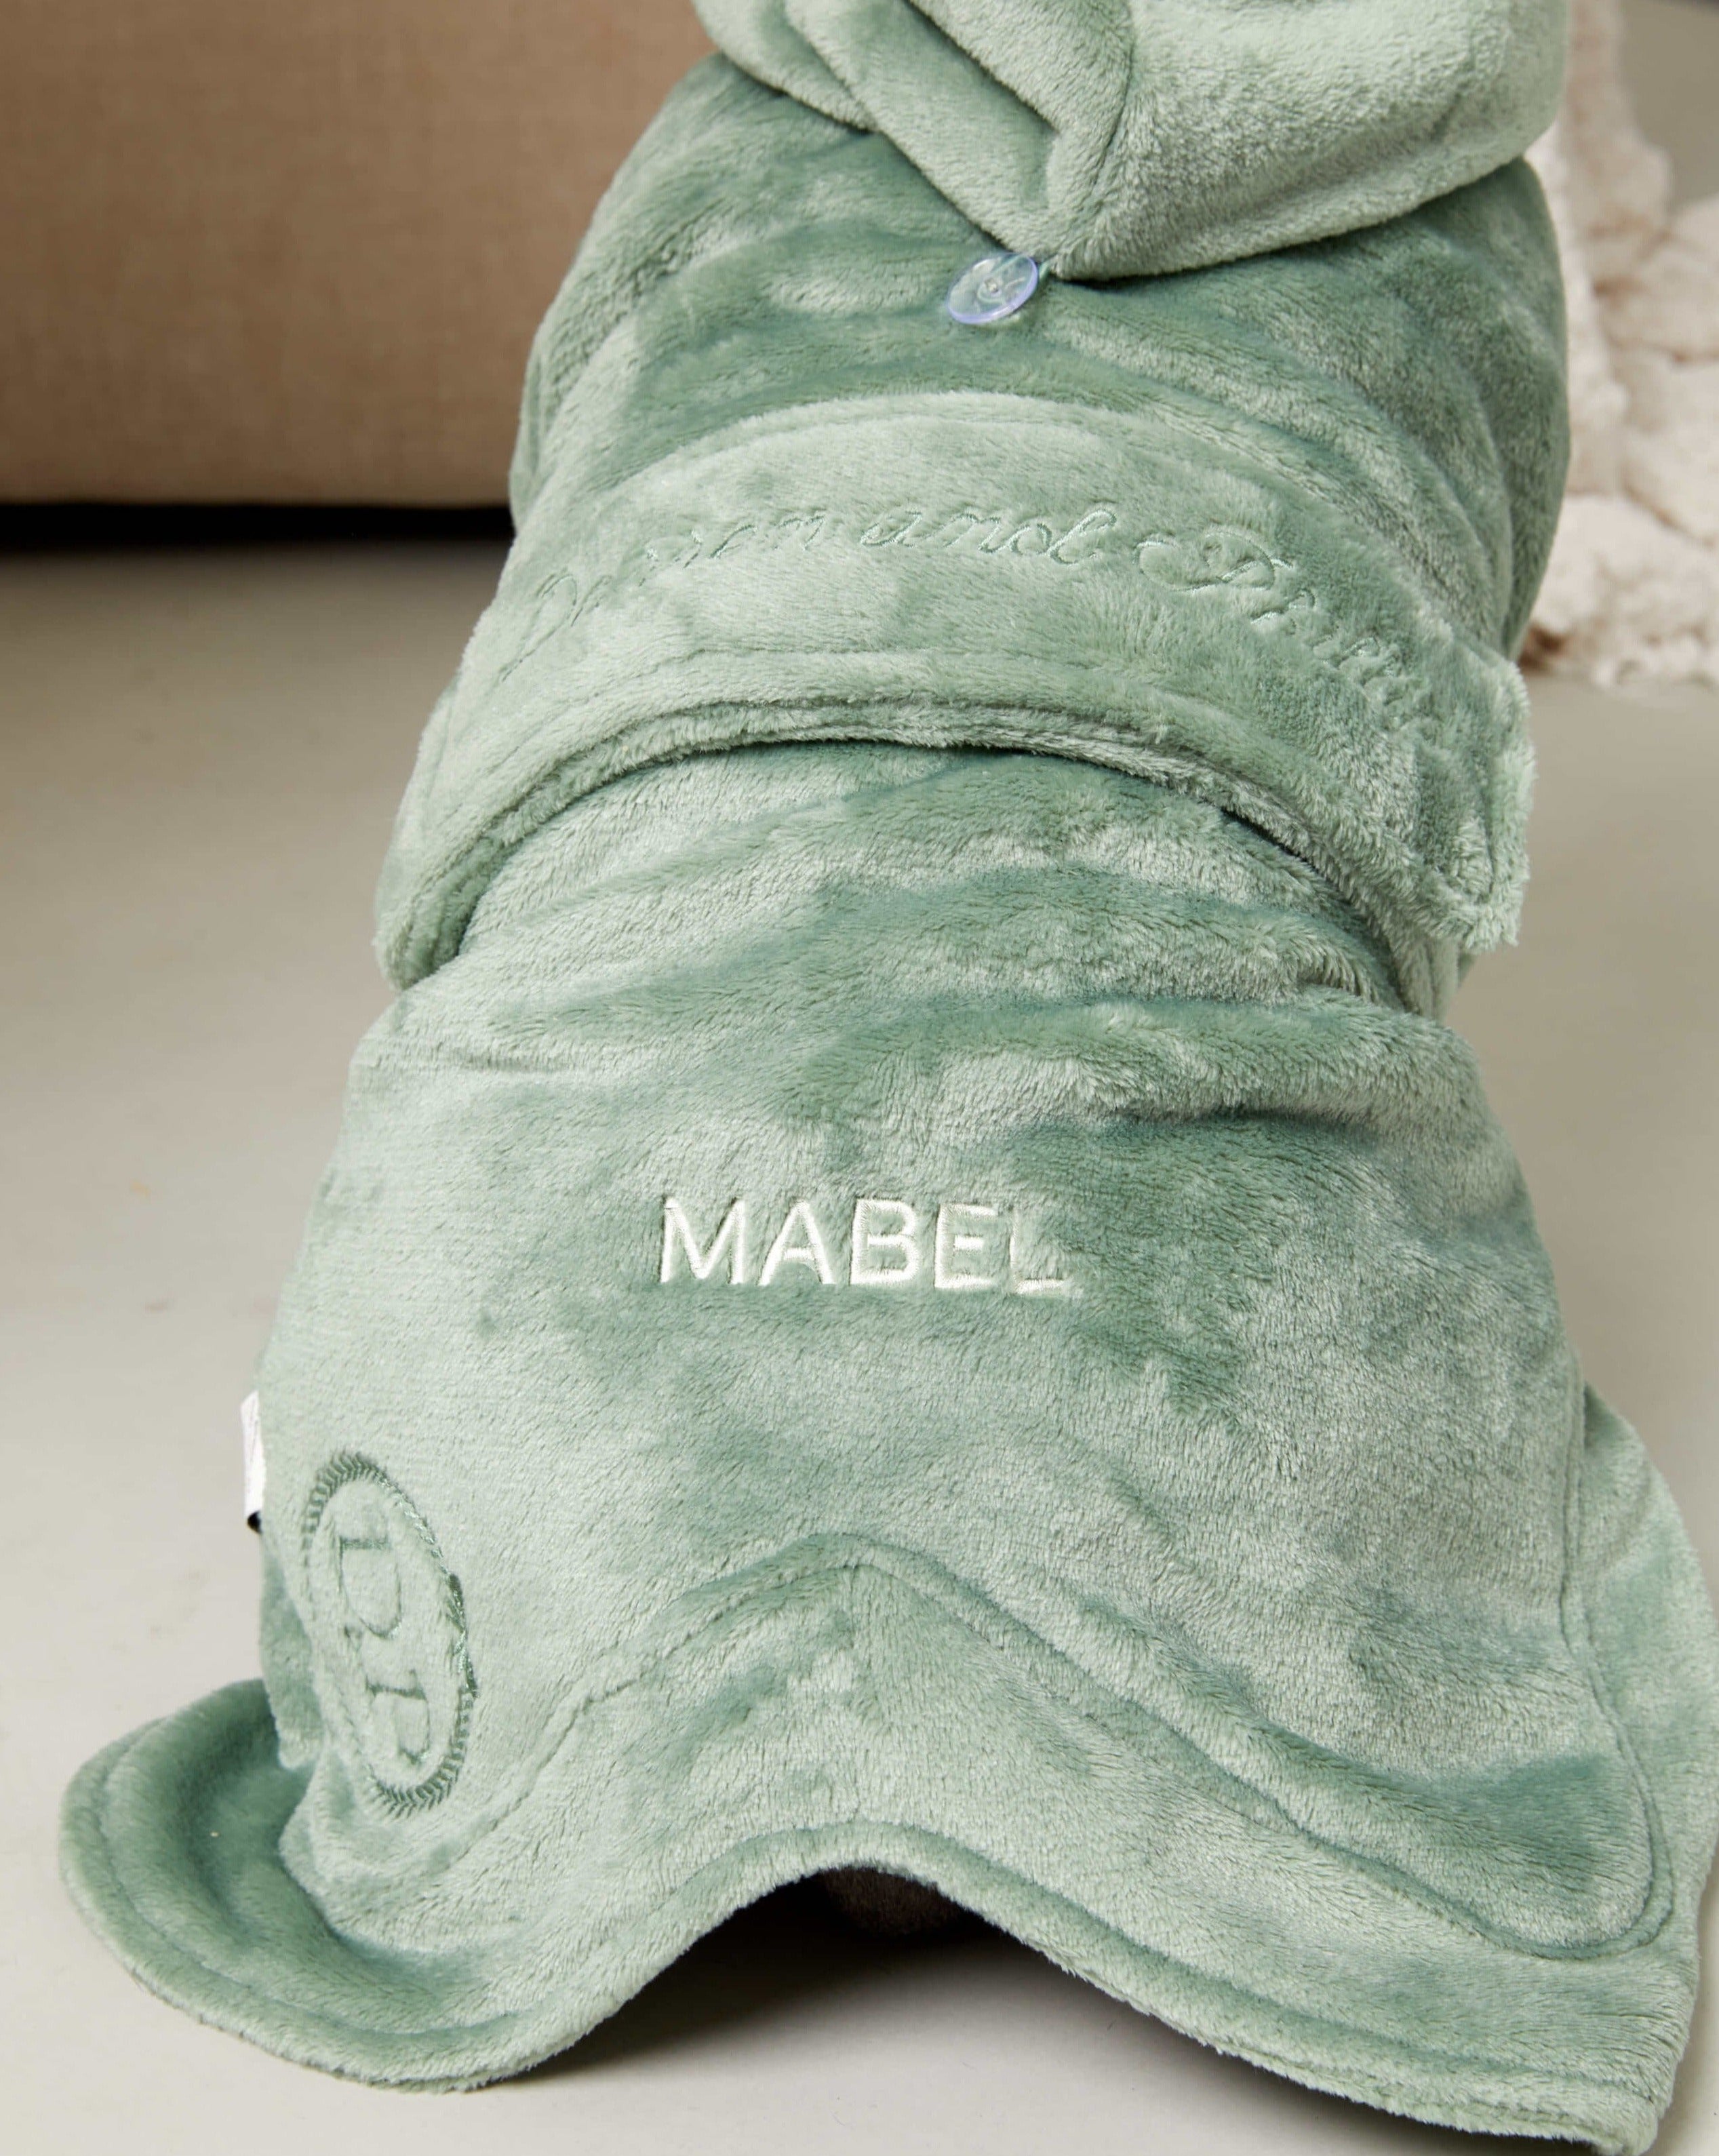 A personalised green dog robe from Darren and Phillip.